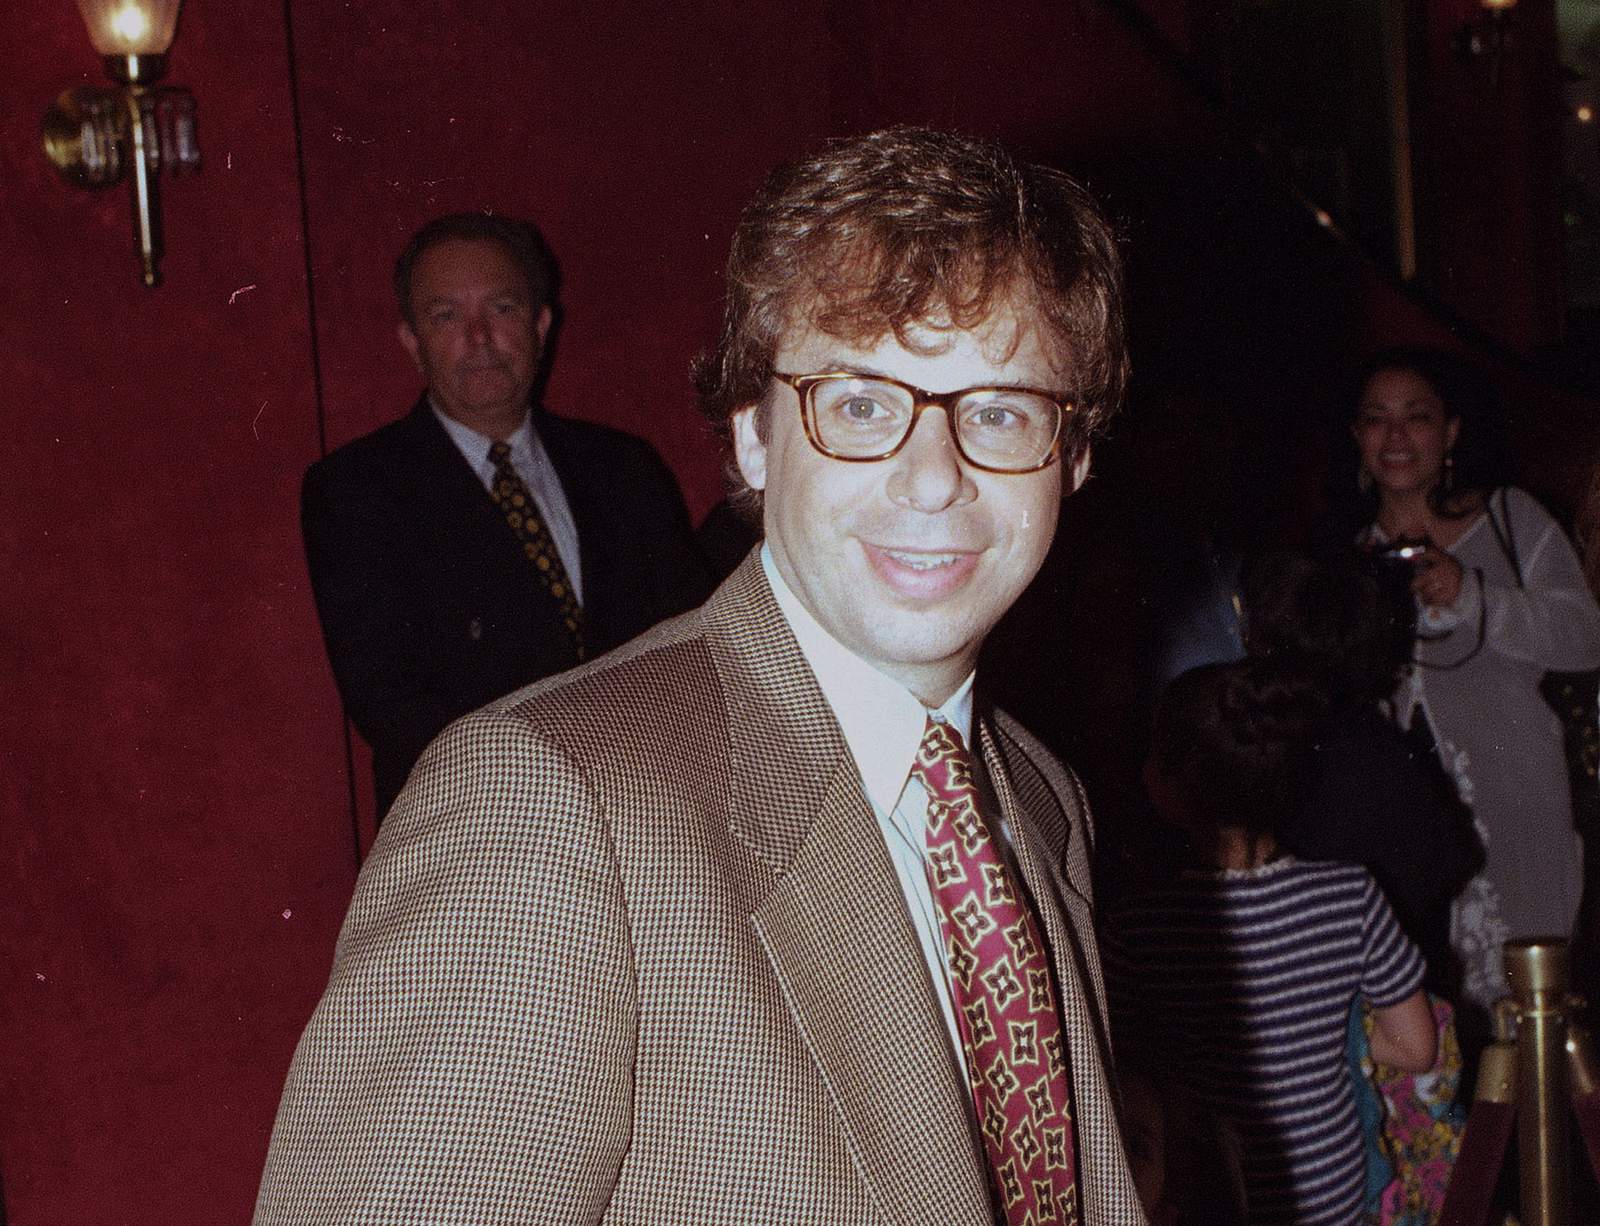 Suspect arrested in attack on actor Rick Moranis